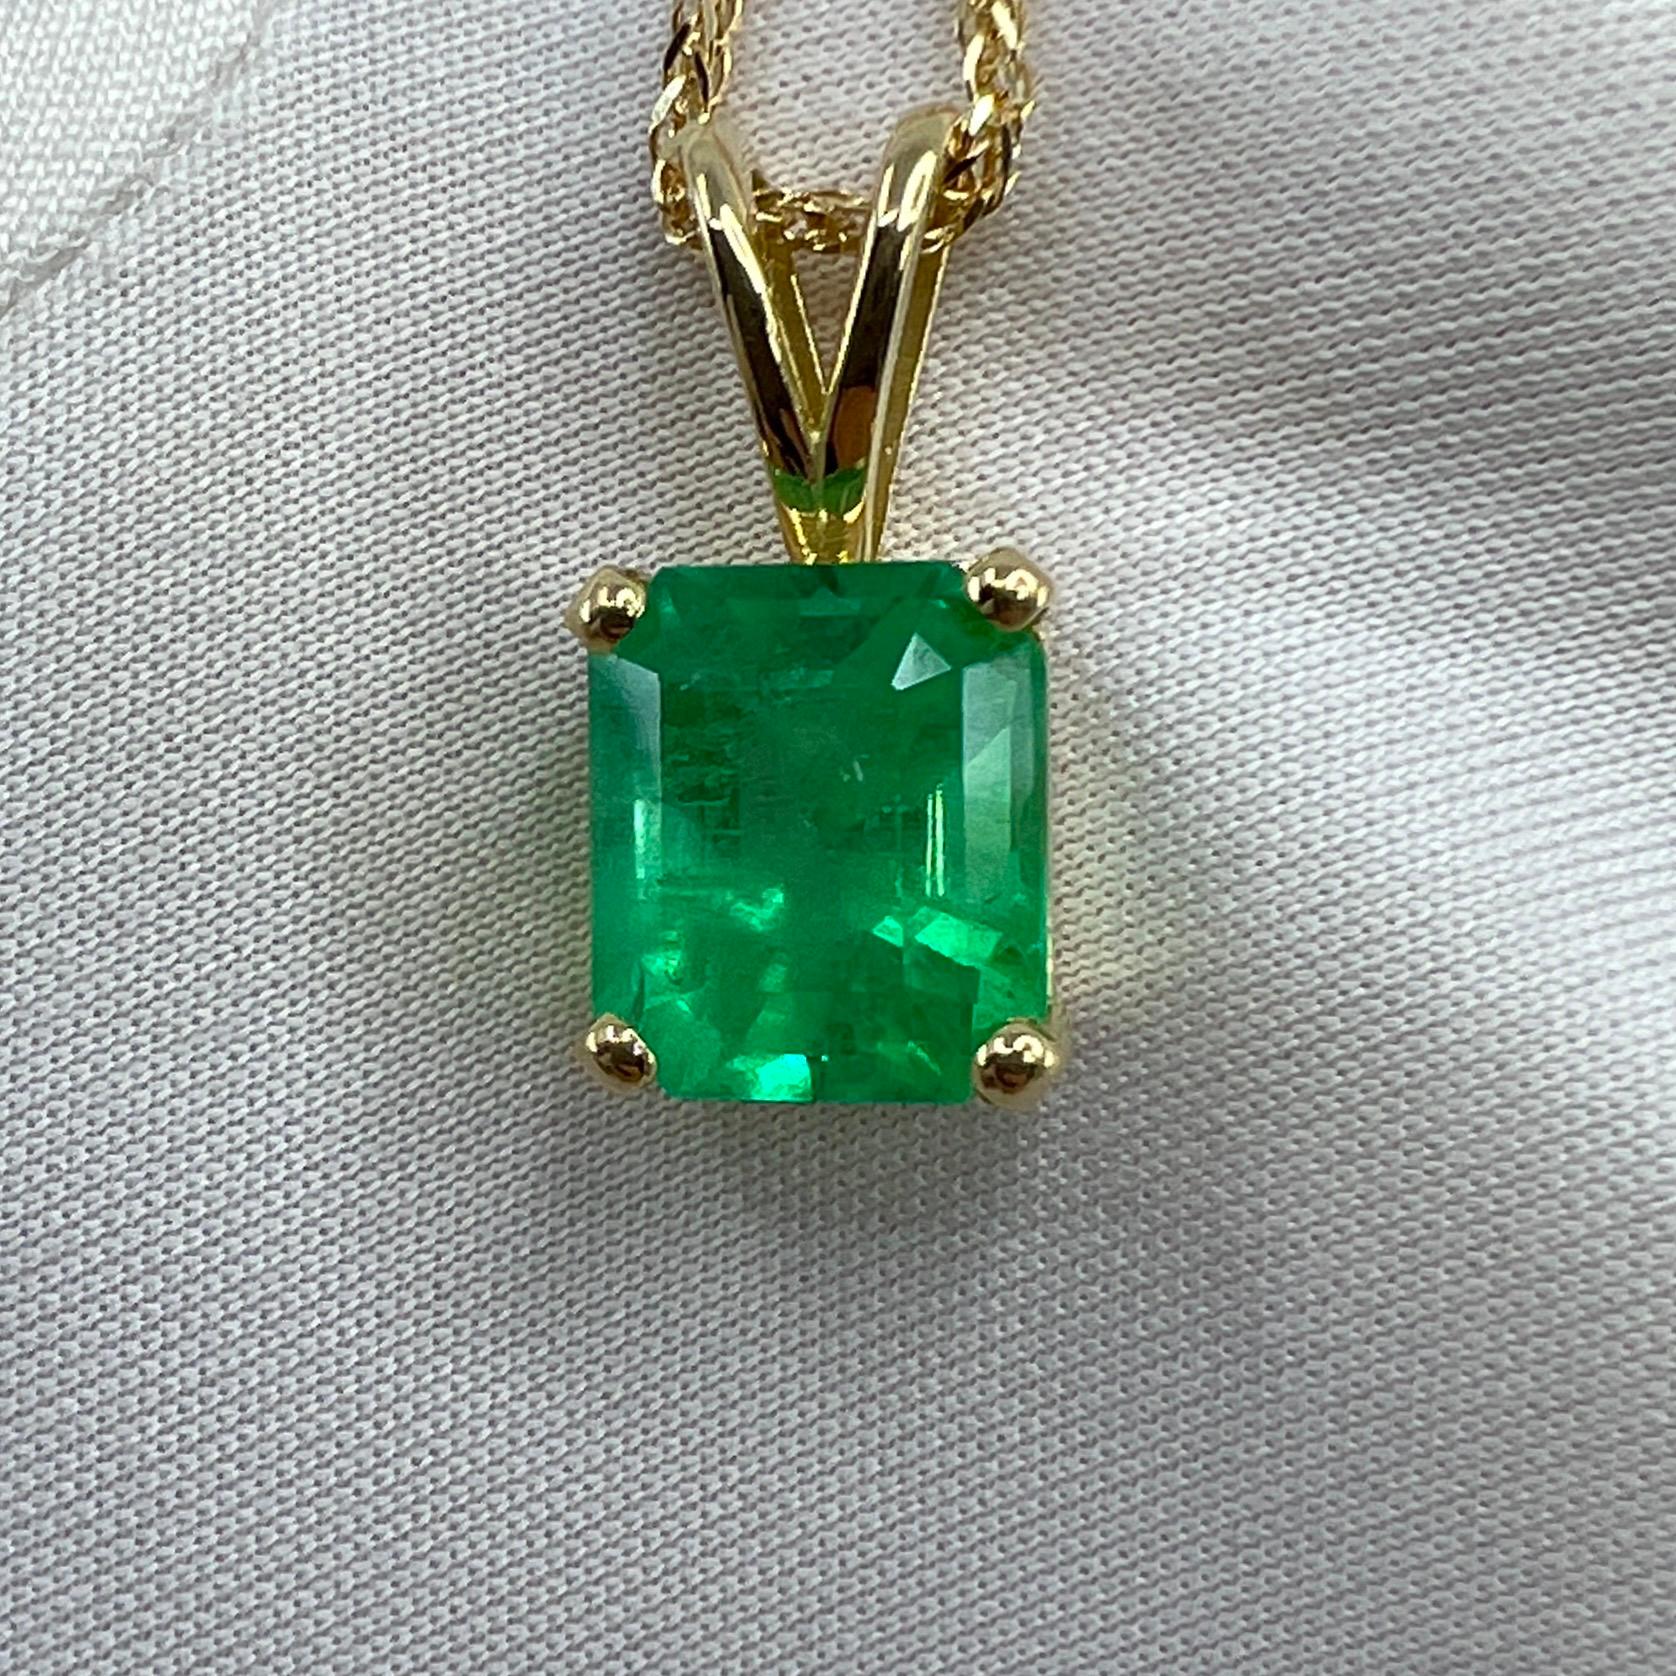 GIA Certified 3.32ct Vivid Green Colombian Emerald 18k Gold Pendant Necklace 2